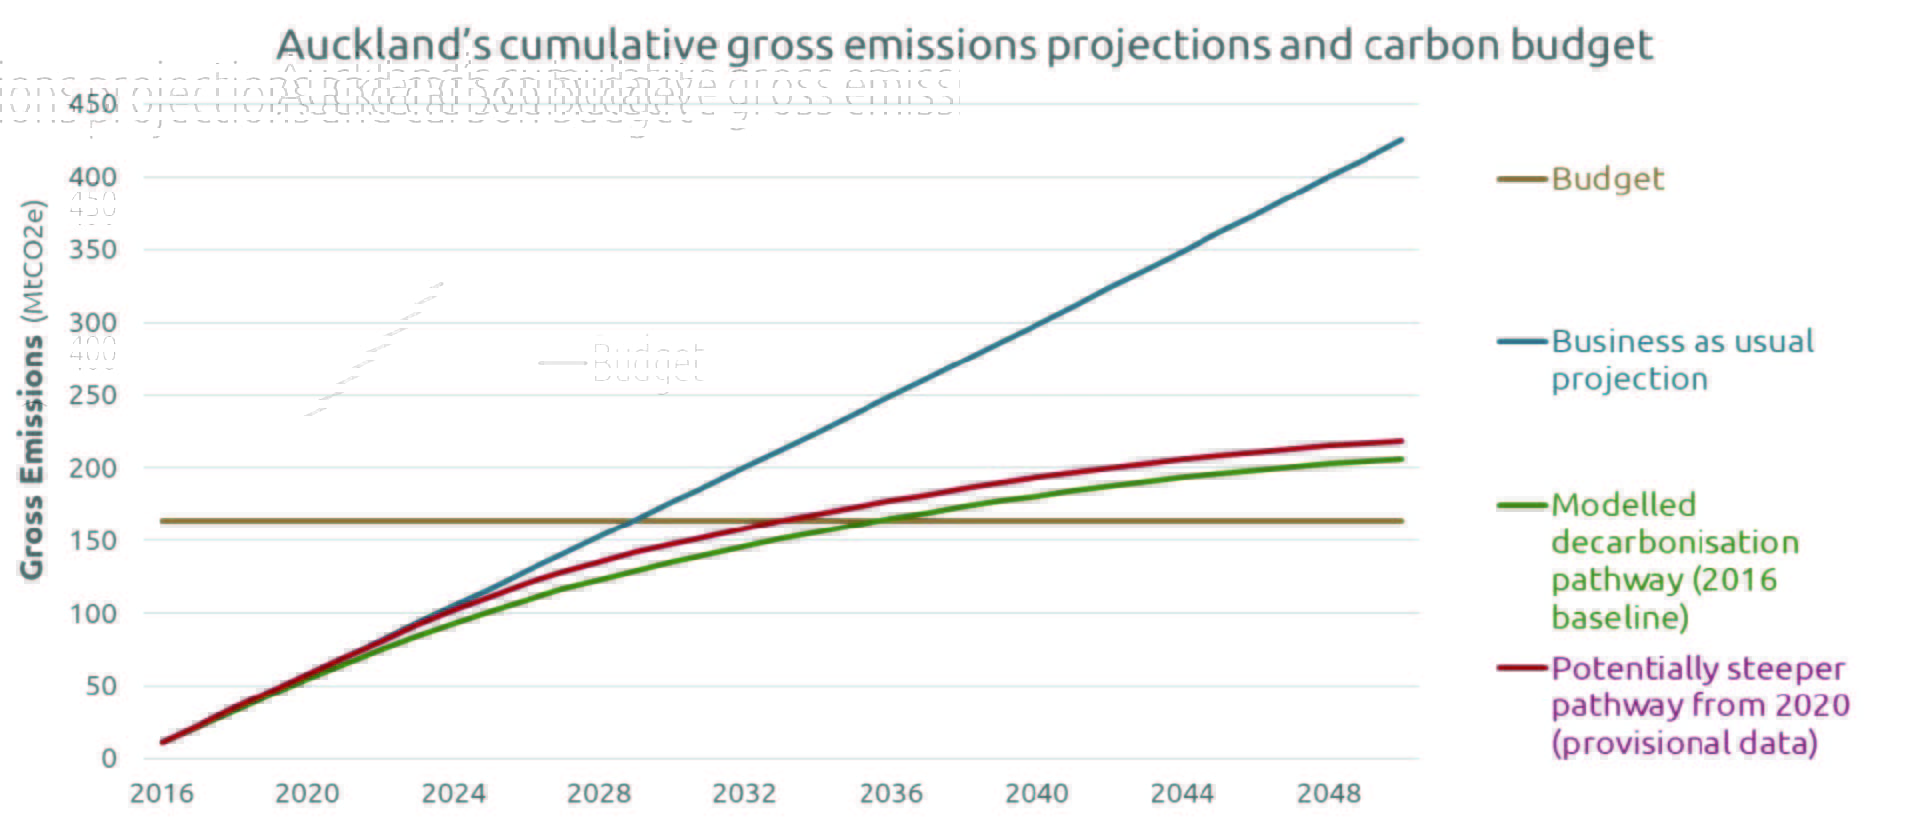 Graph showing Auckland cumulative gross emissions projections and carbon budget.